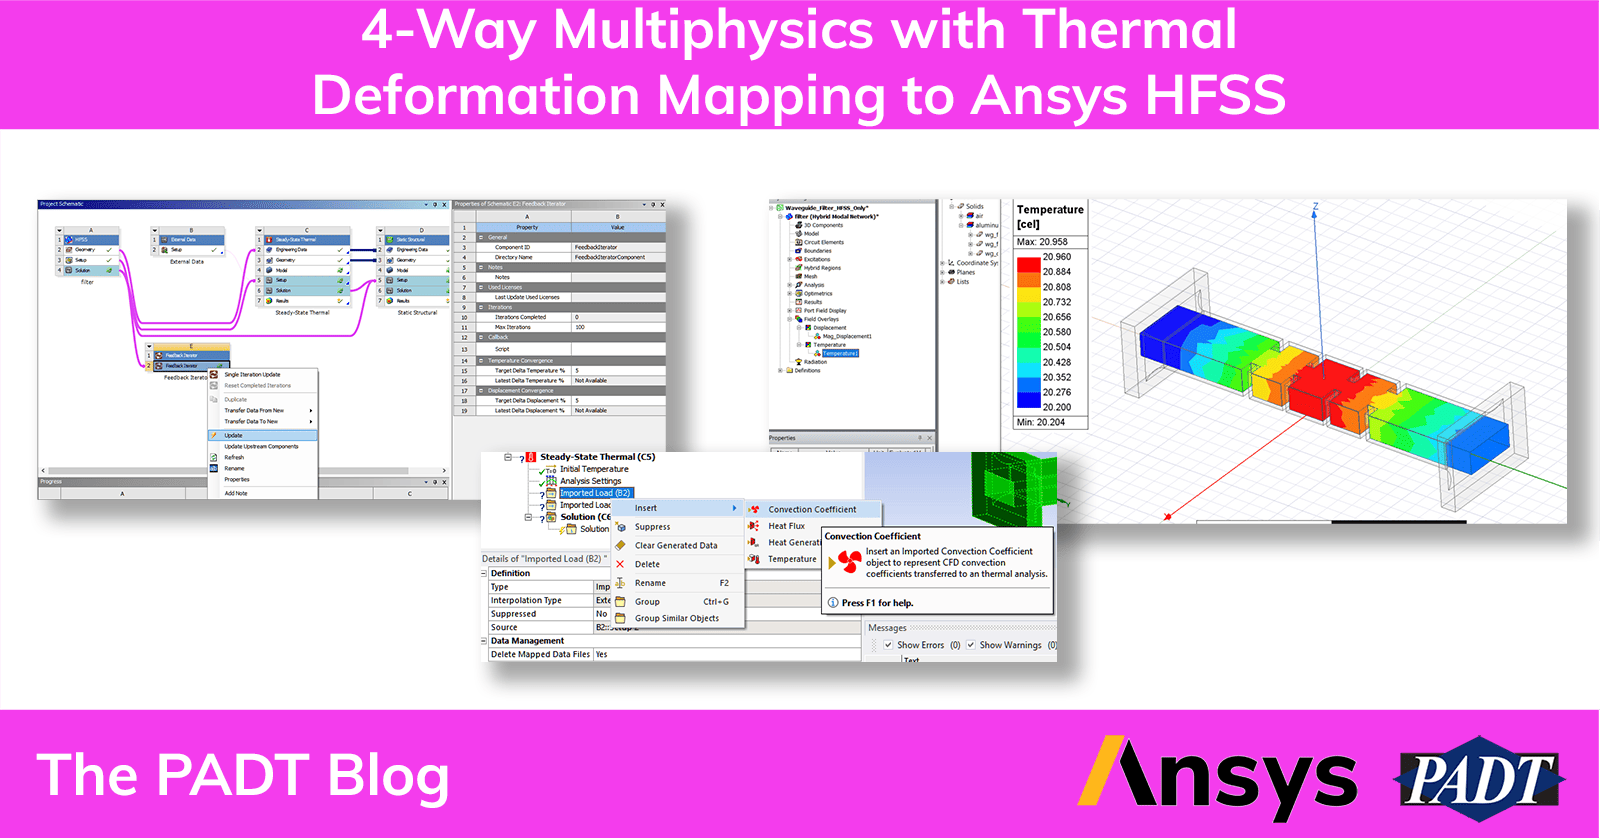 4-Way Multiphysics with Thermal Deformation Mapping to Ansys HFSS